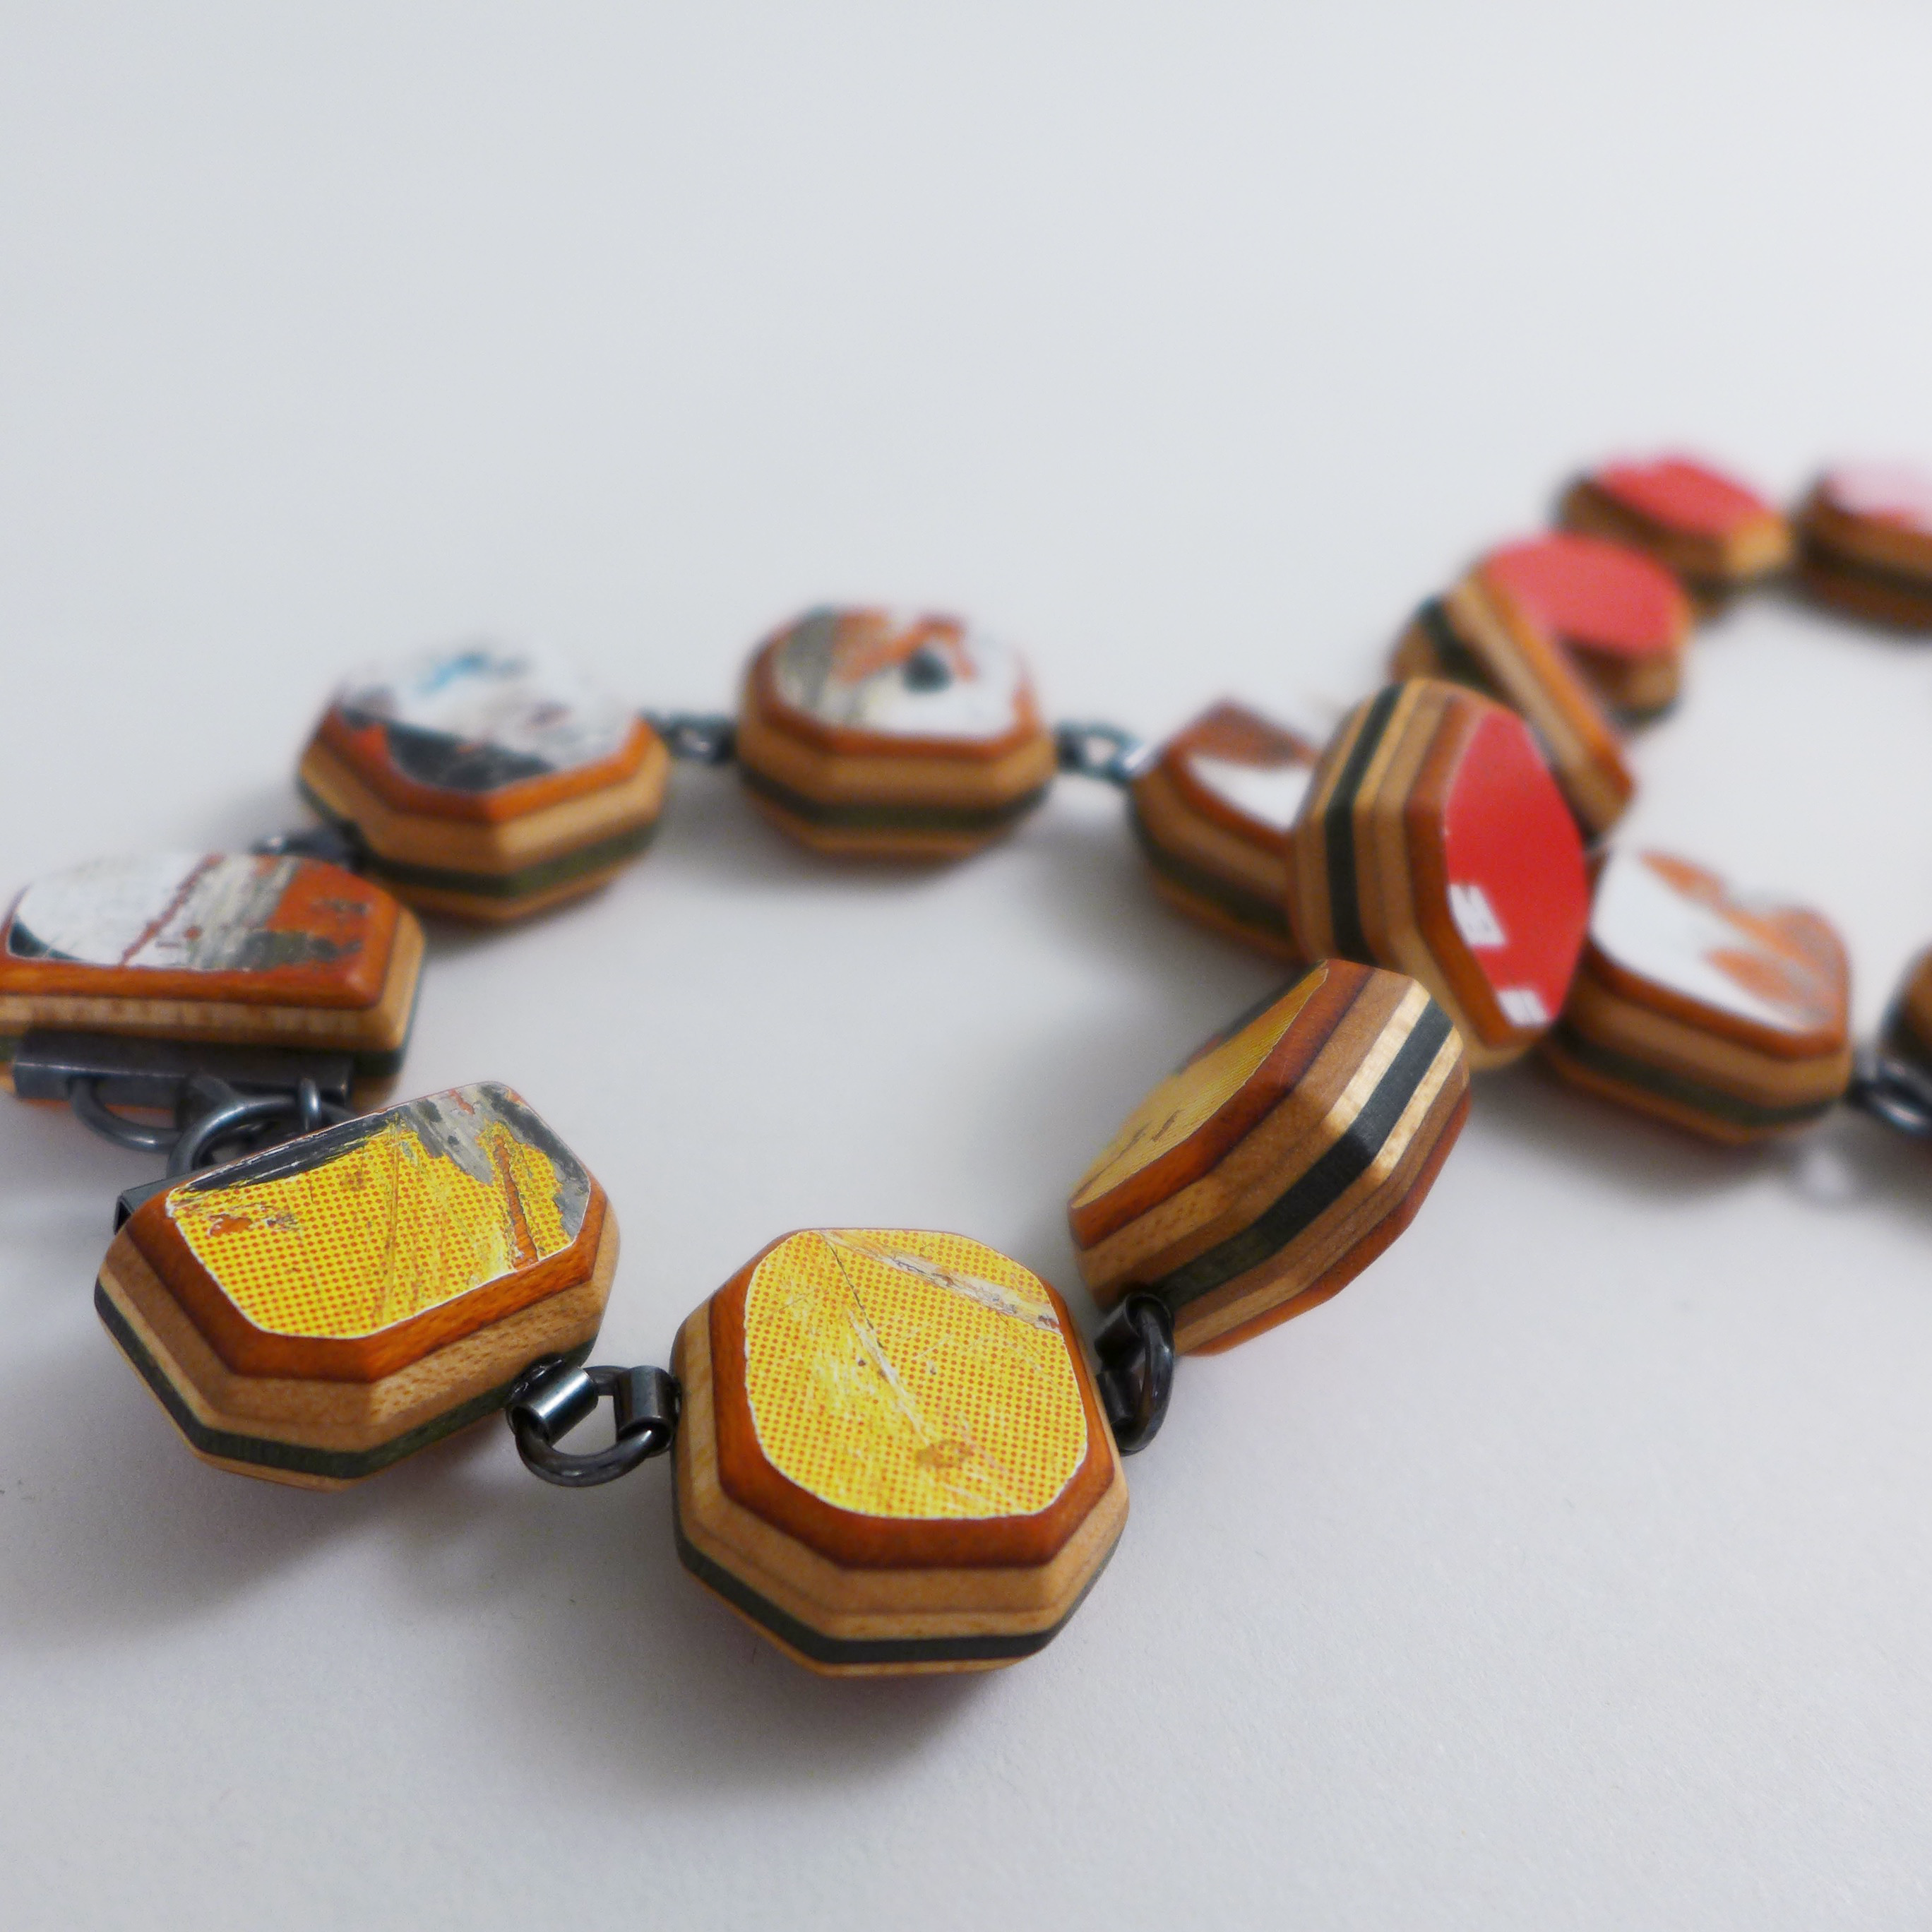 Red Statement necklace, Handmade, Unique, Colorful skateboard wood jewelry by Tara Locklear at the Center for Art in Wood